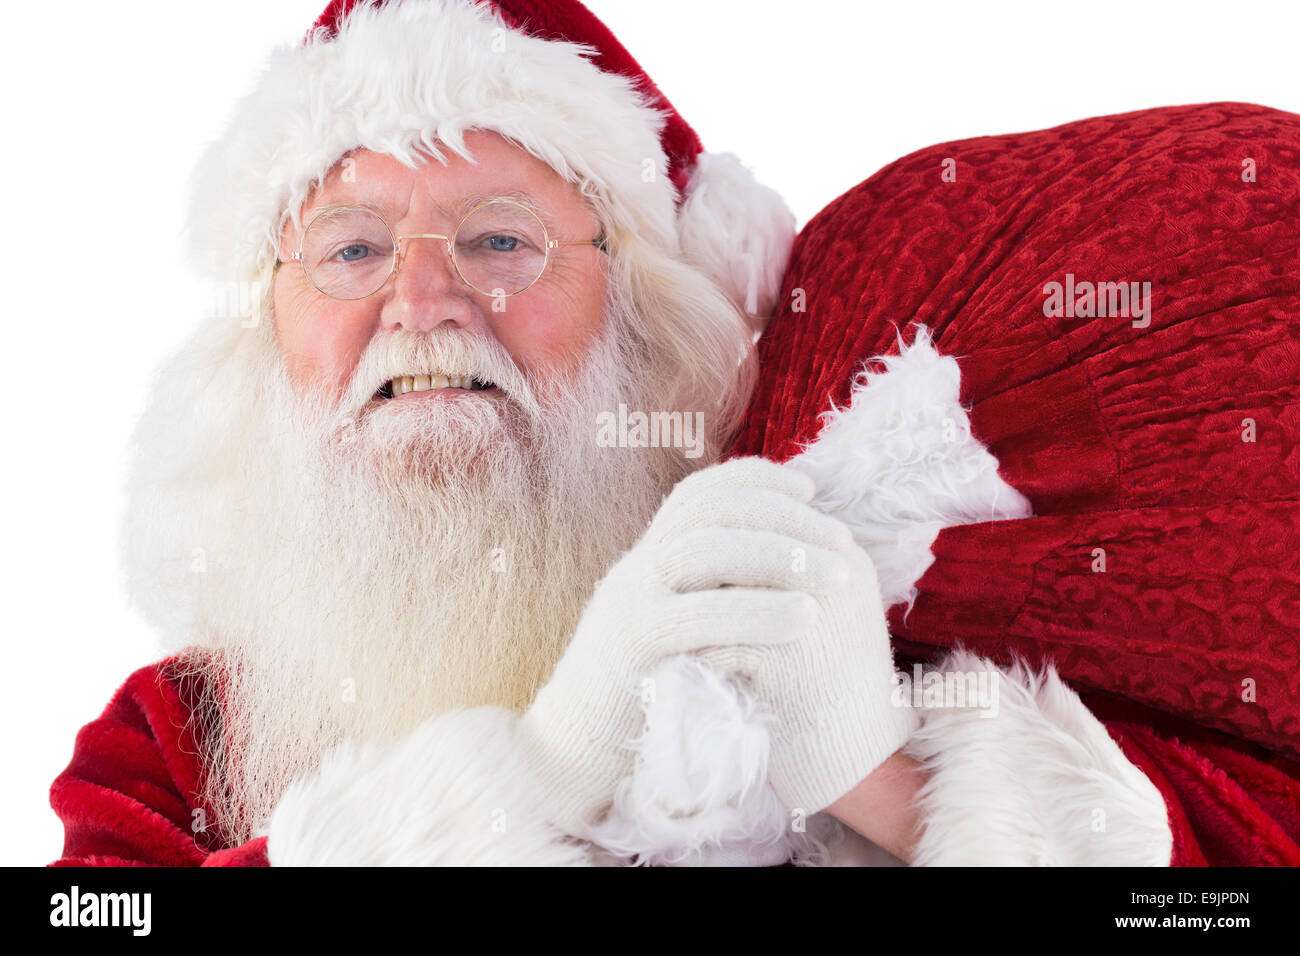 Santa carries his red bag and smiles Stock Photo